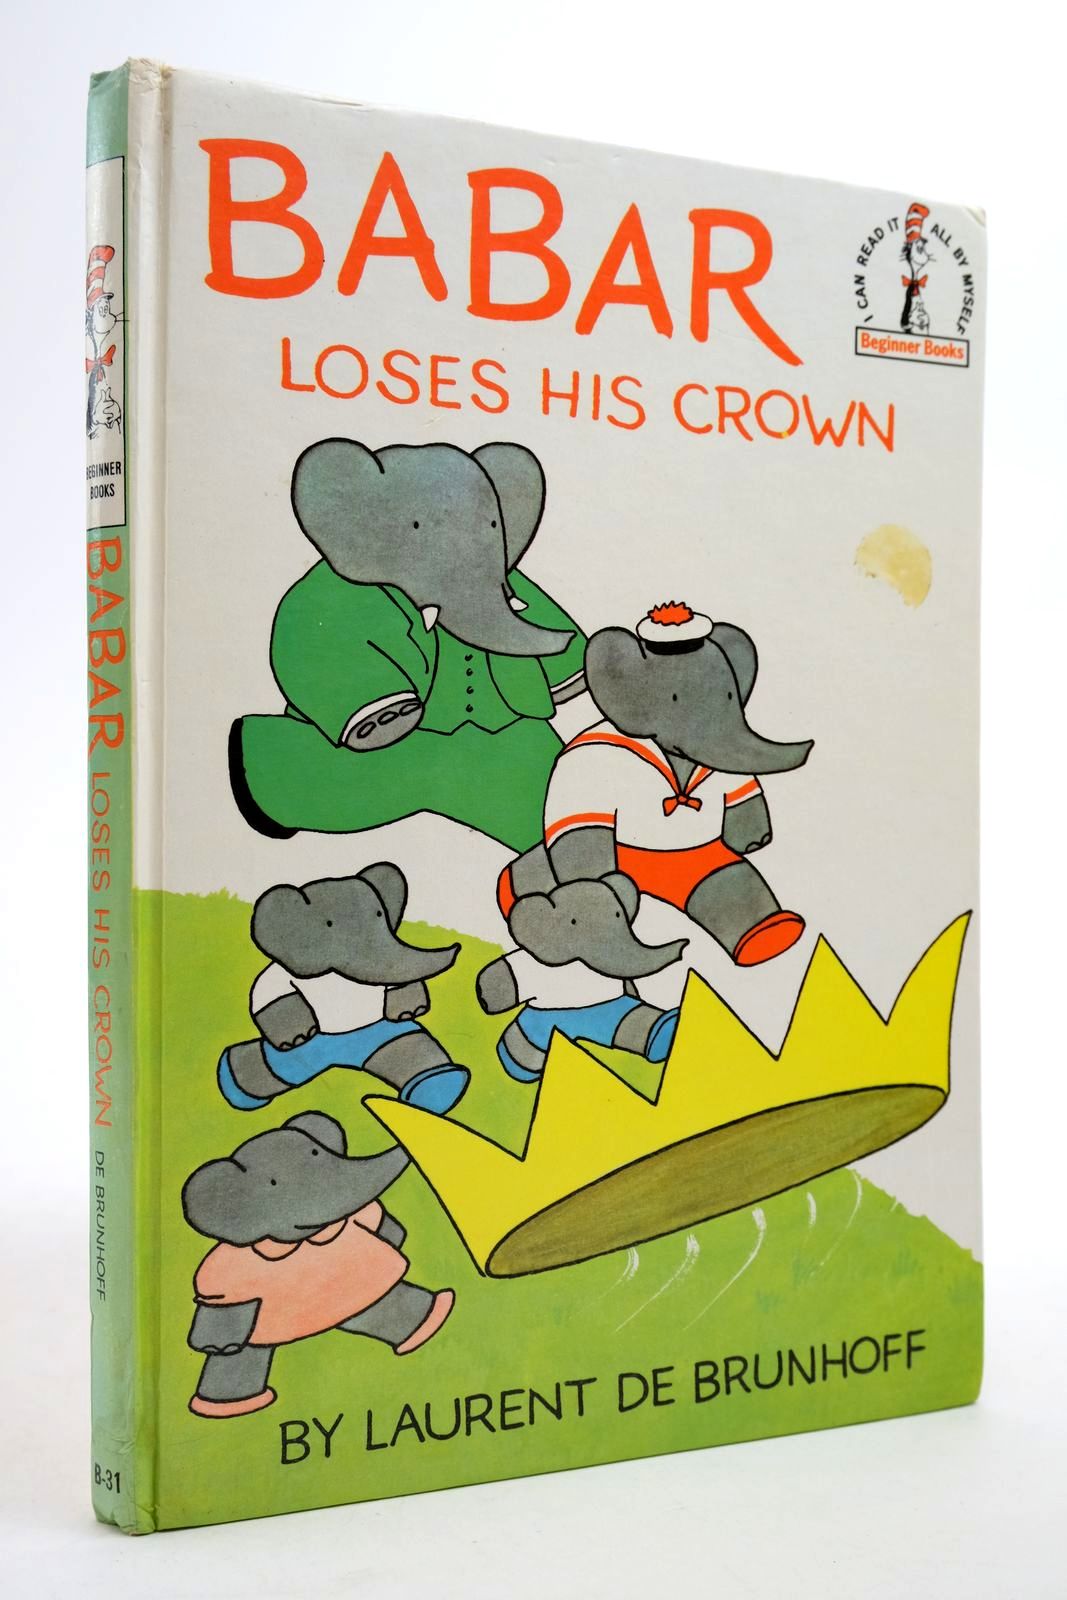 Photo of BABAR LOSES HIS CROWN written by De Brunhoff, Laurent illustrated by De Brunhoff, Laurent published by Collins and Harvill (STOCK CODE: 2140102)  for sale by Stella & Rose's Books